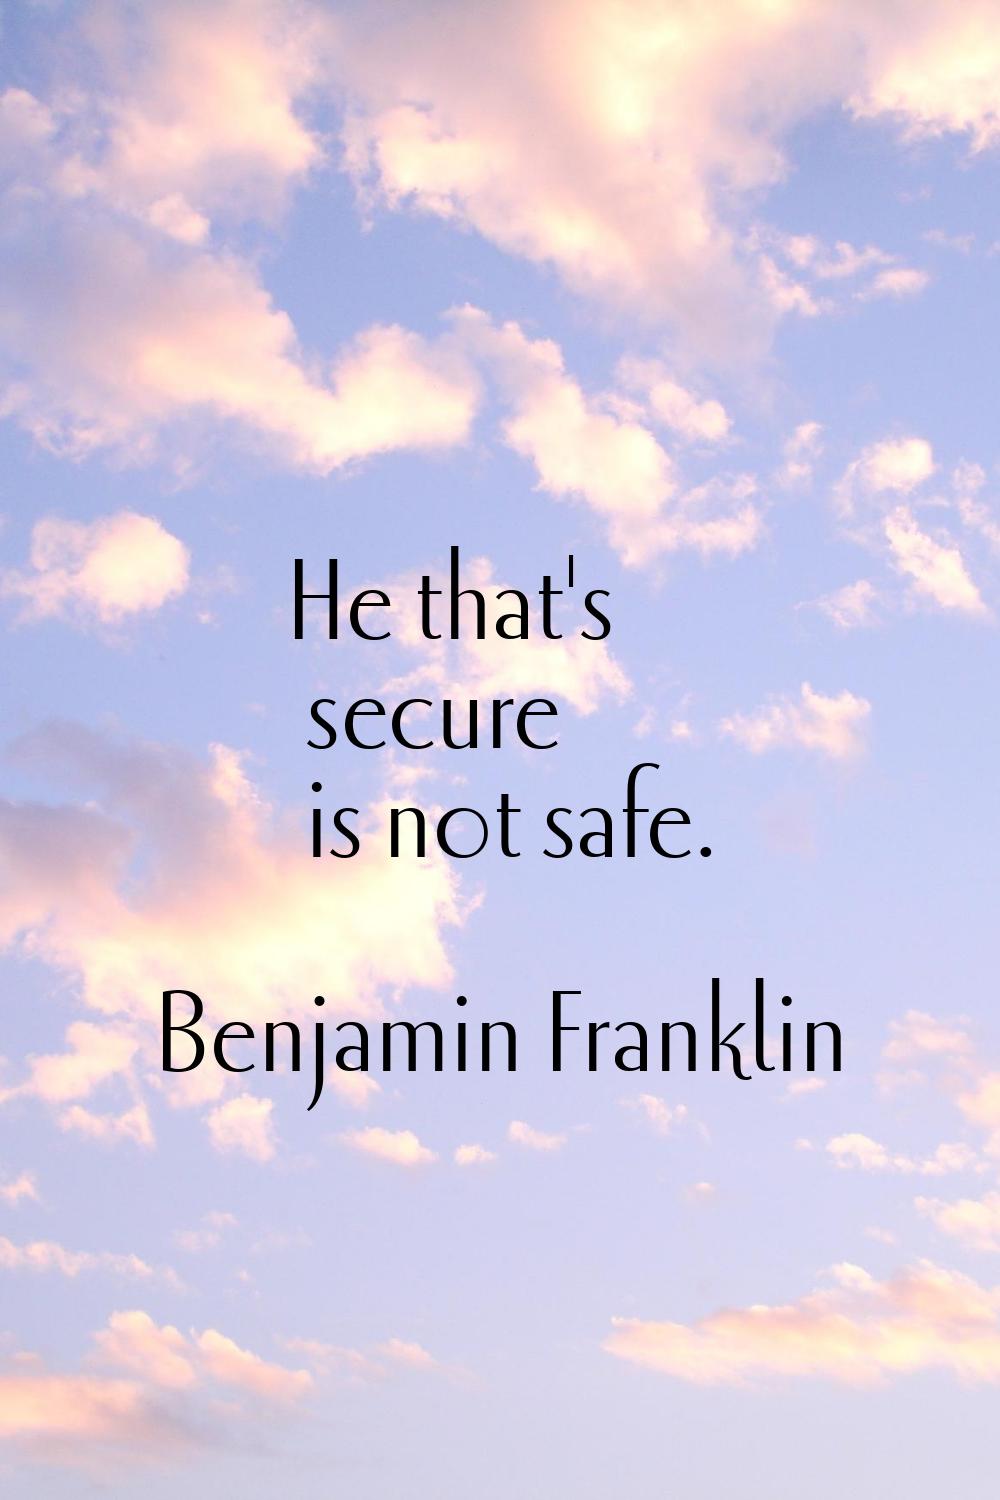 He that's secure is not safe.